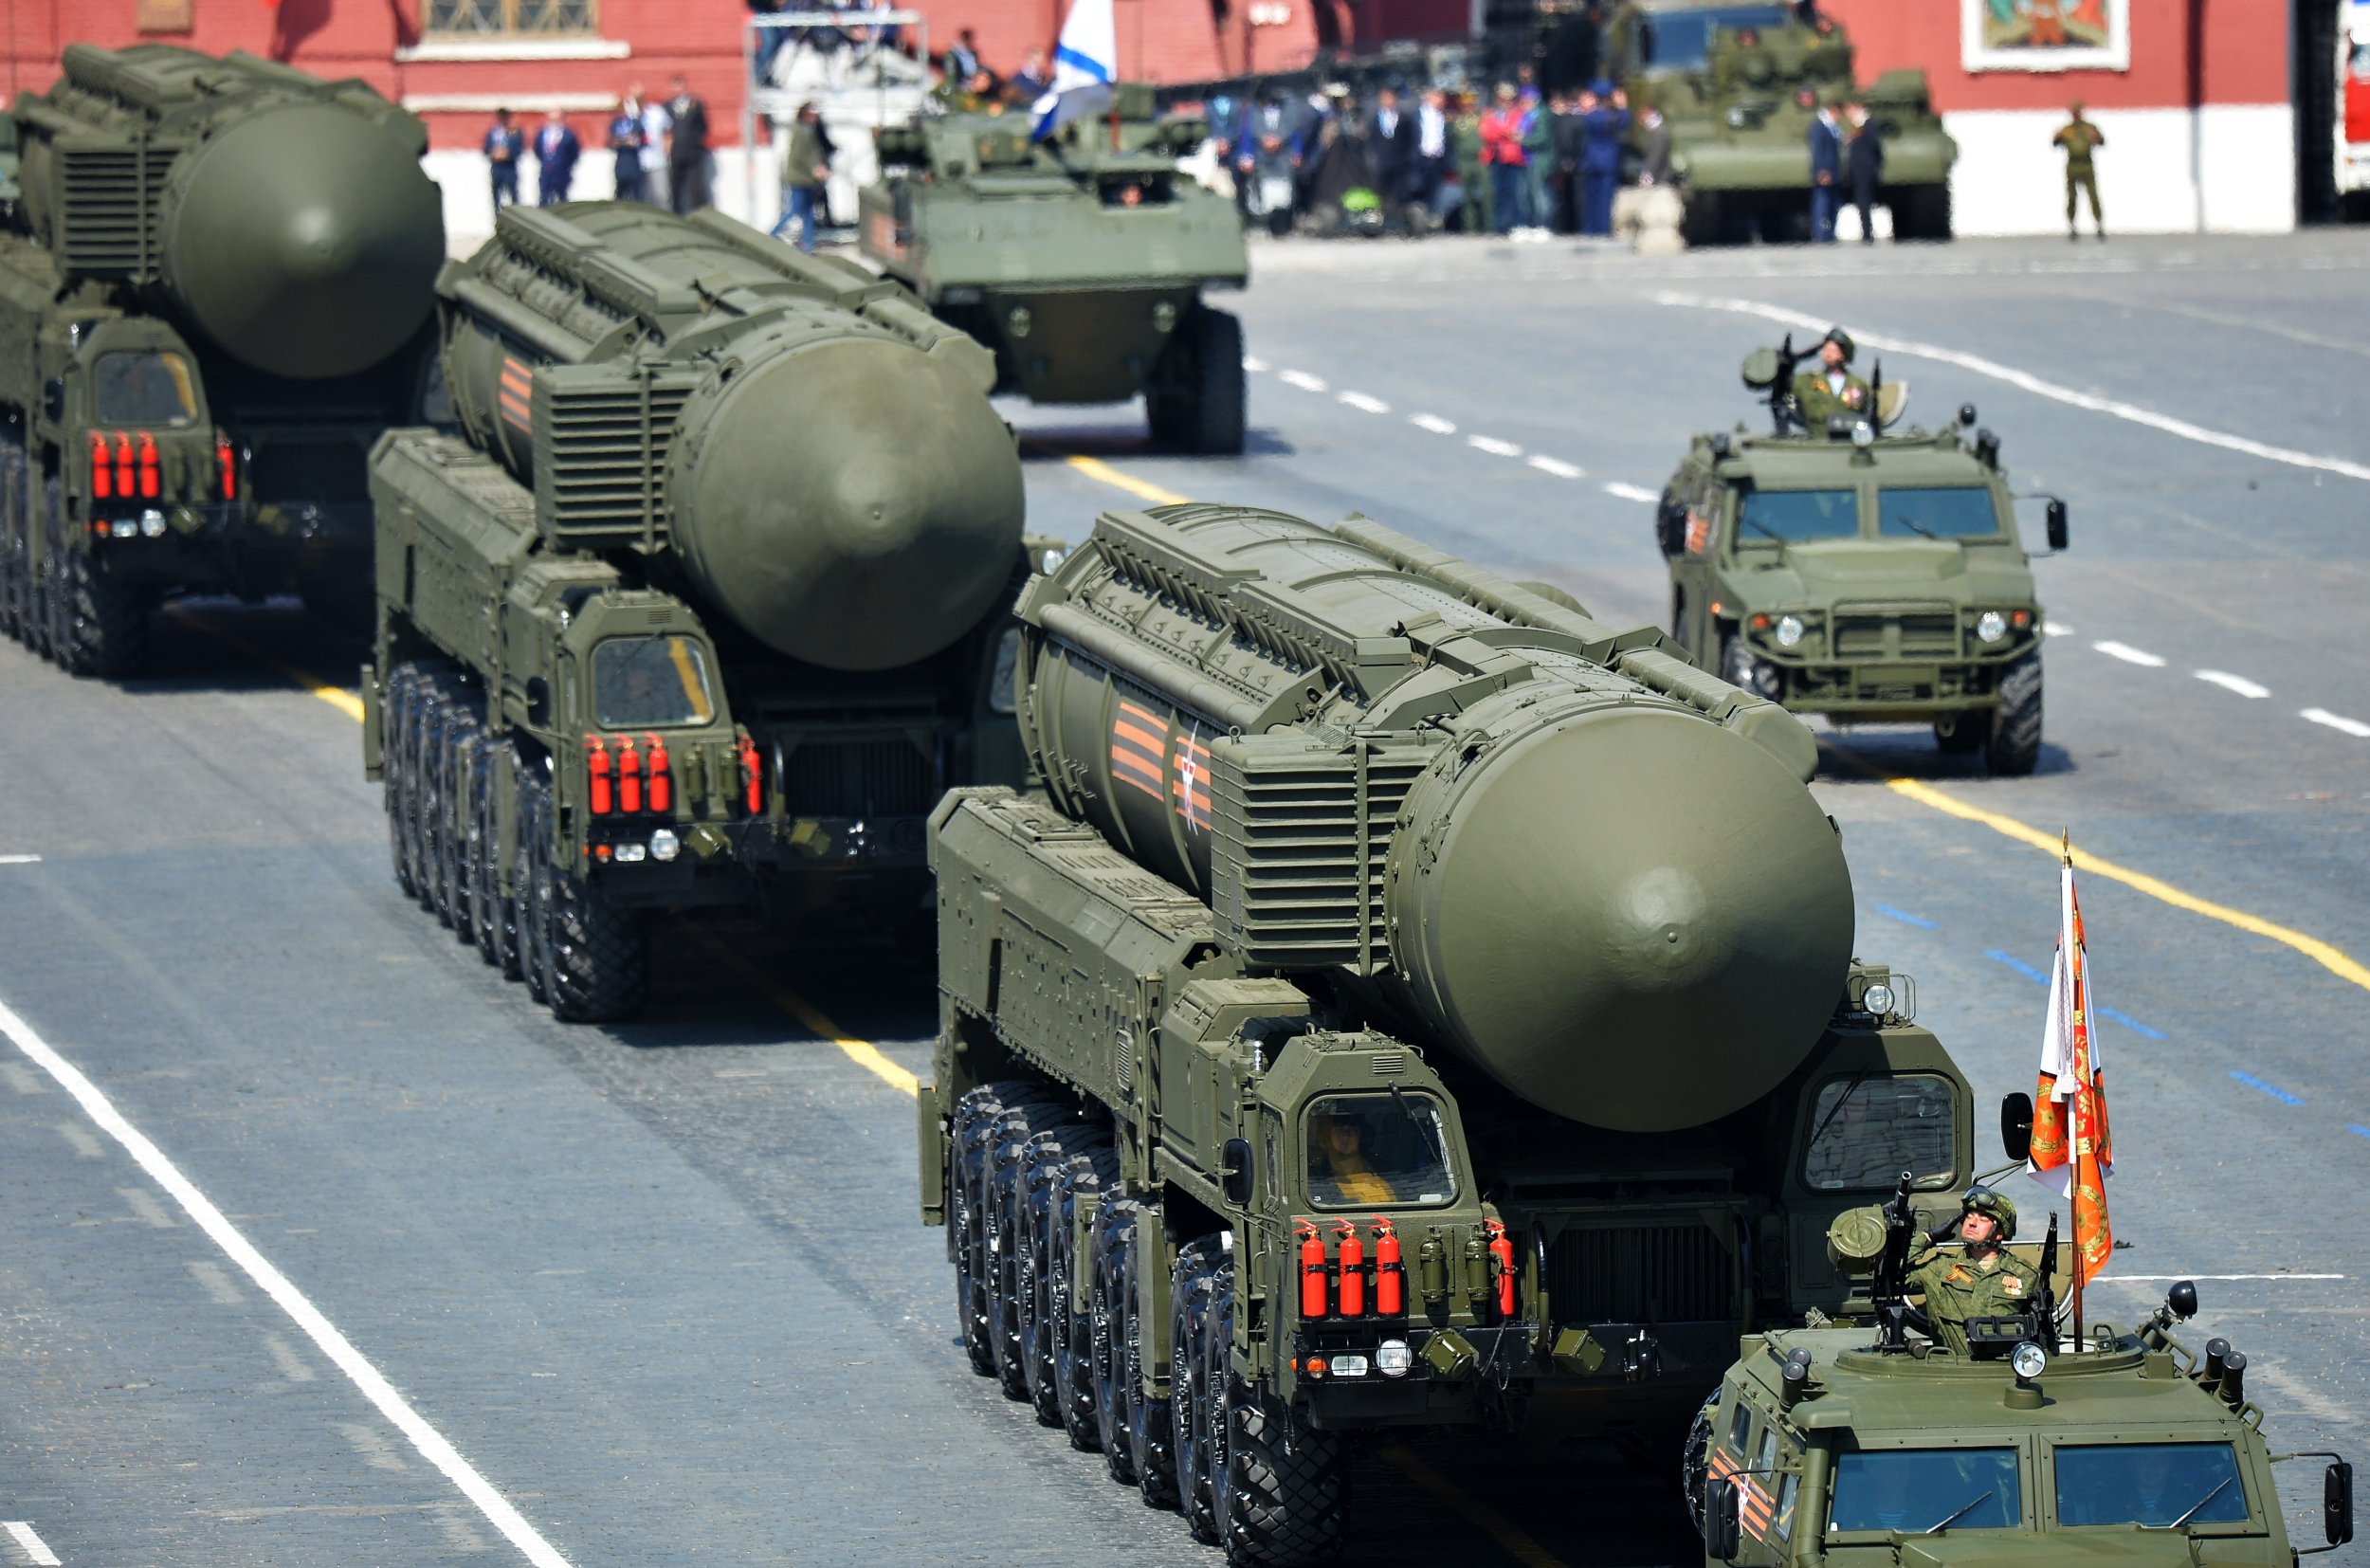 Yars Rs 24 Icbm Victory Day Moscow 